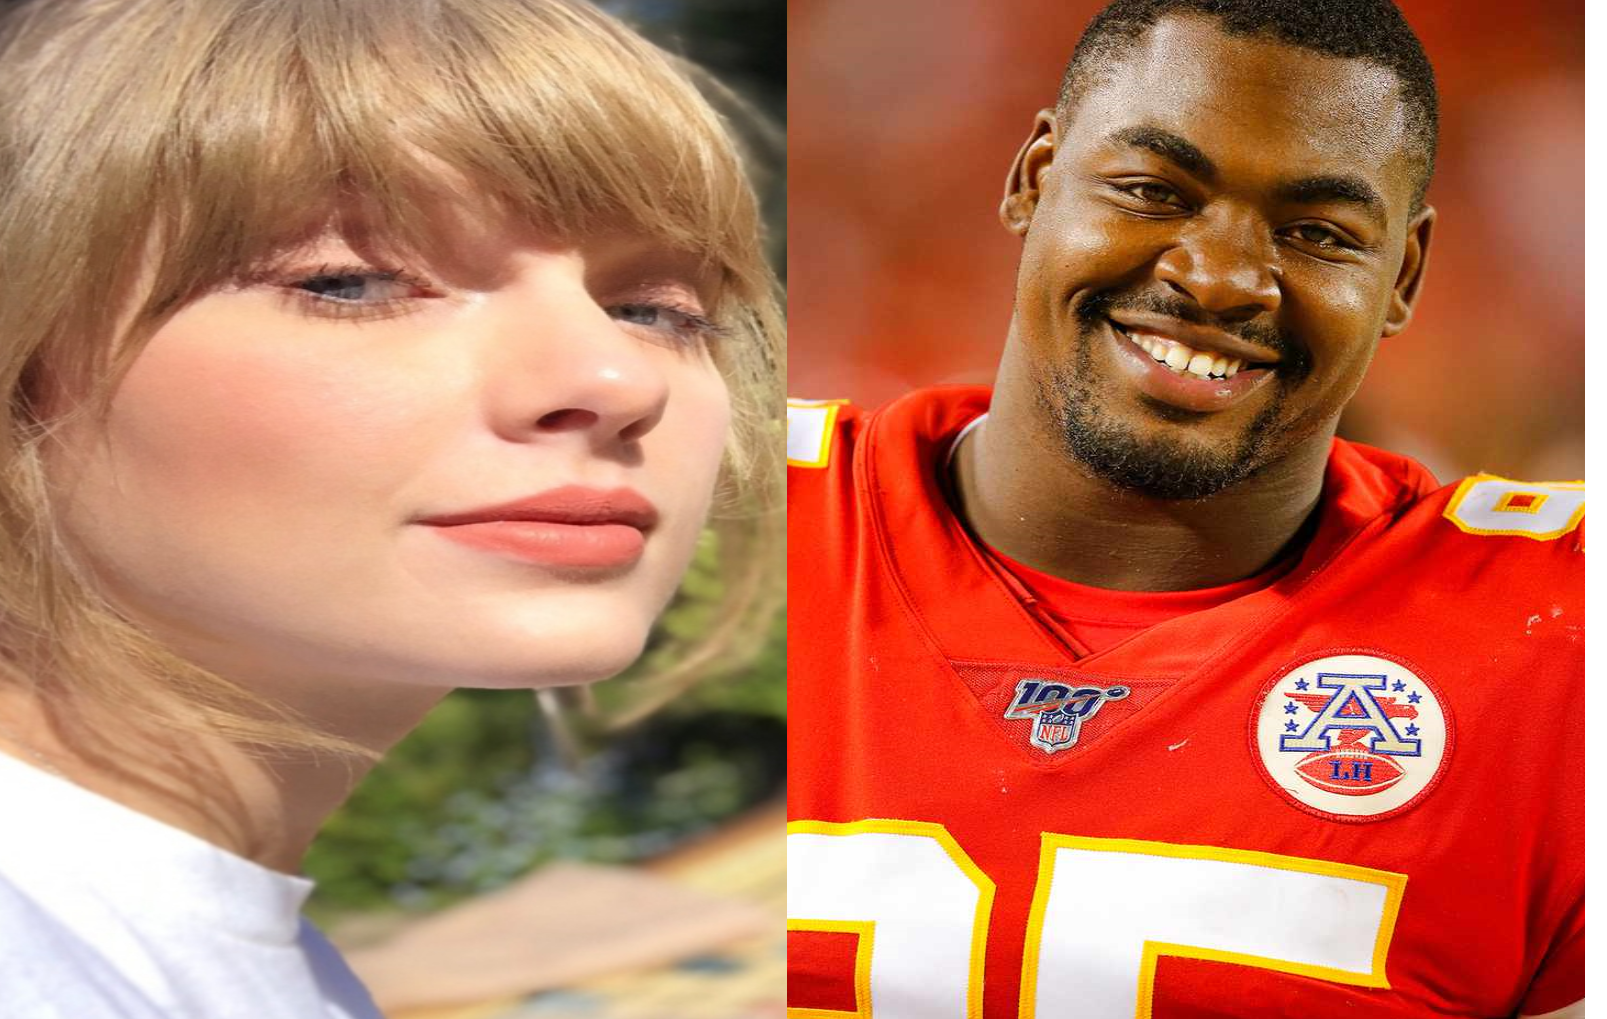 "Taylor Swift shocked the world by announcing her split with fiancée Travis Kelce, stating, 'I believe Jones deserves me more,' only to reveal her engagement to Chris Jones shortly after."